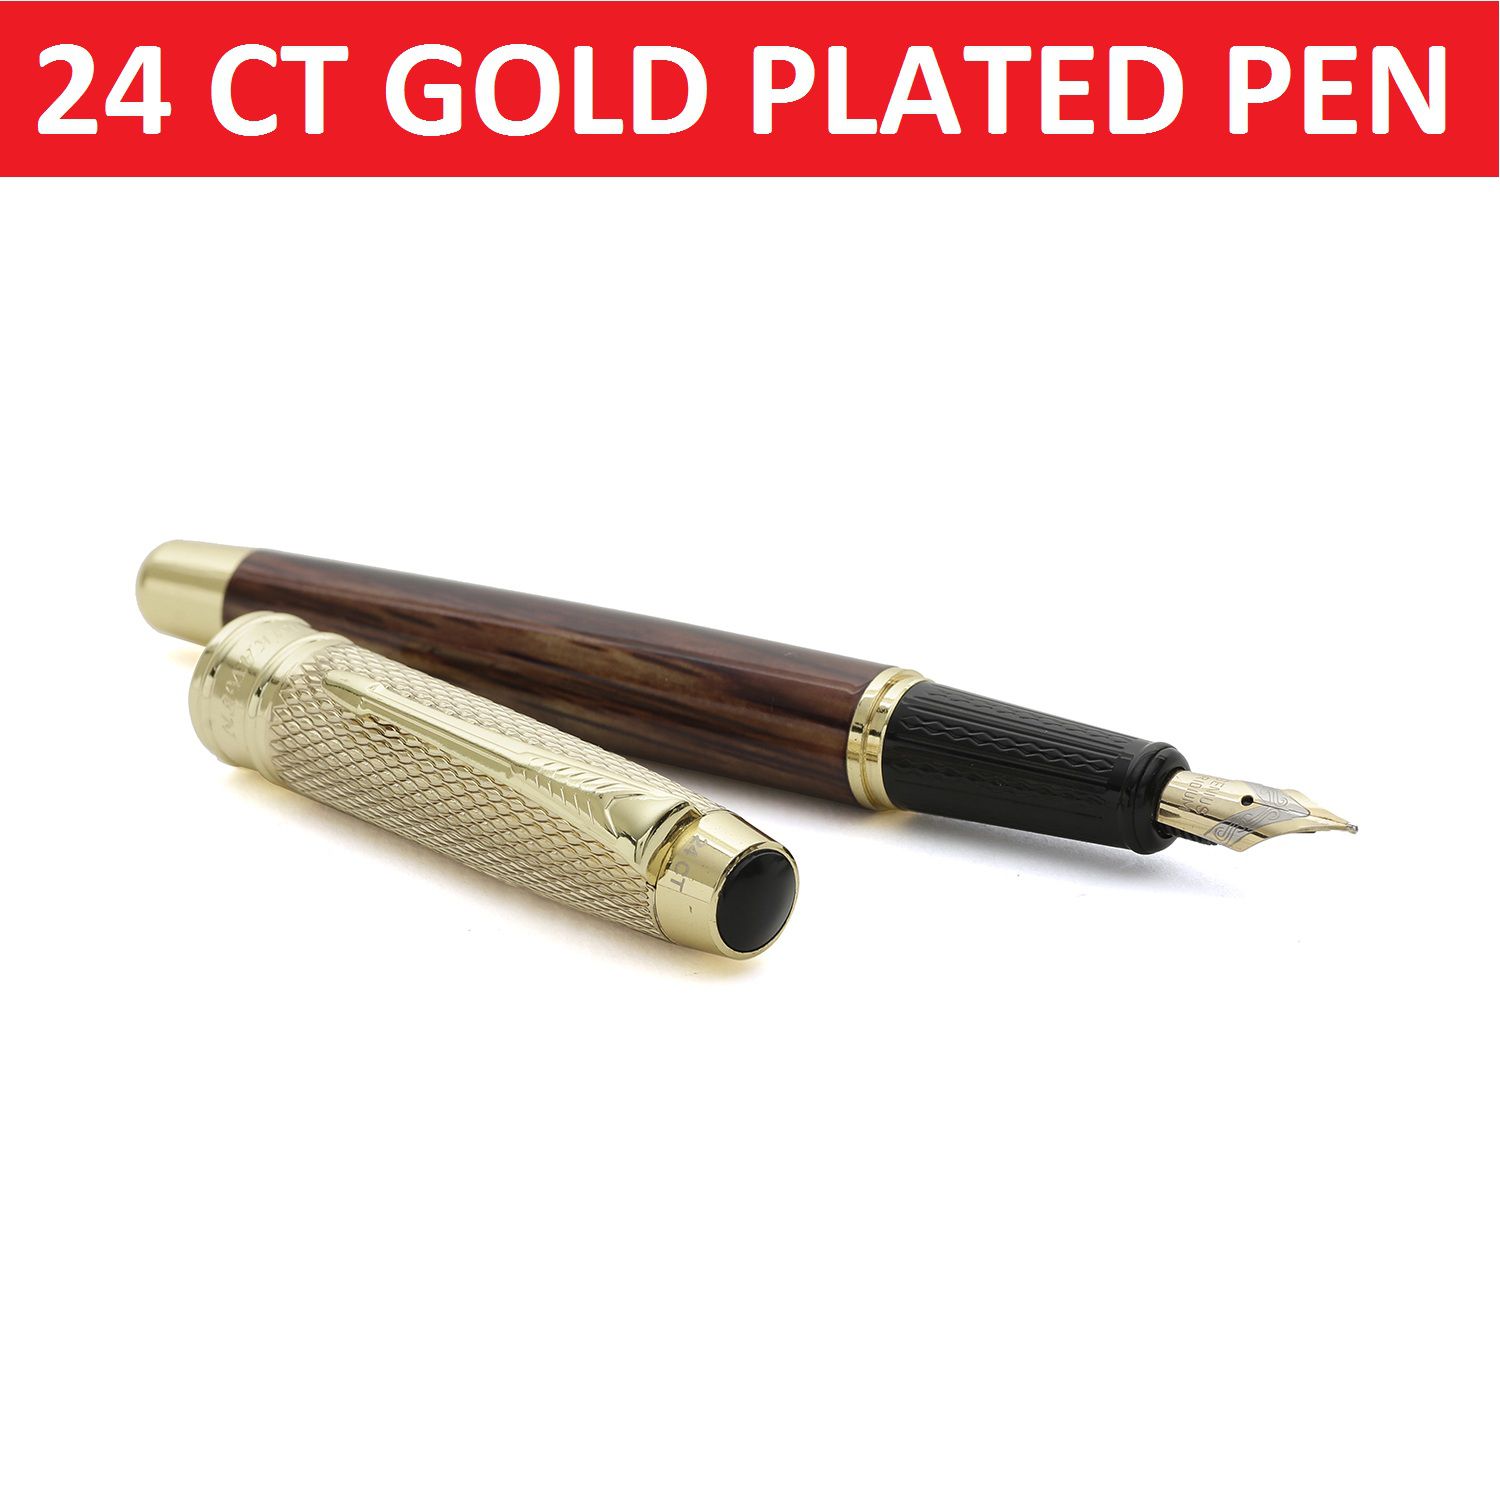     			Hayman Dikawen 24 ct Gold Plated Fountain Pen With Gift Box